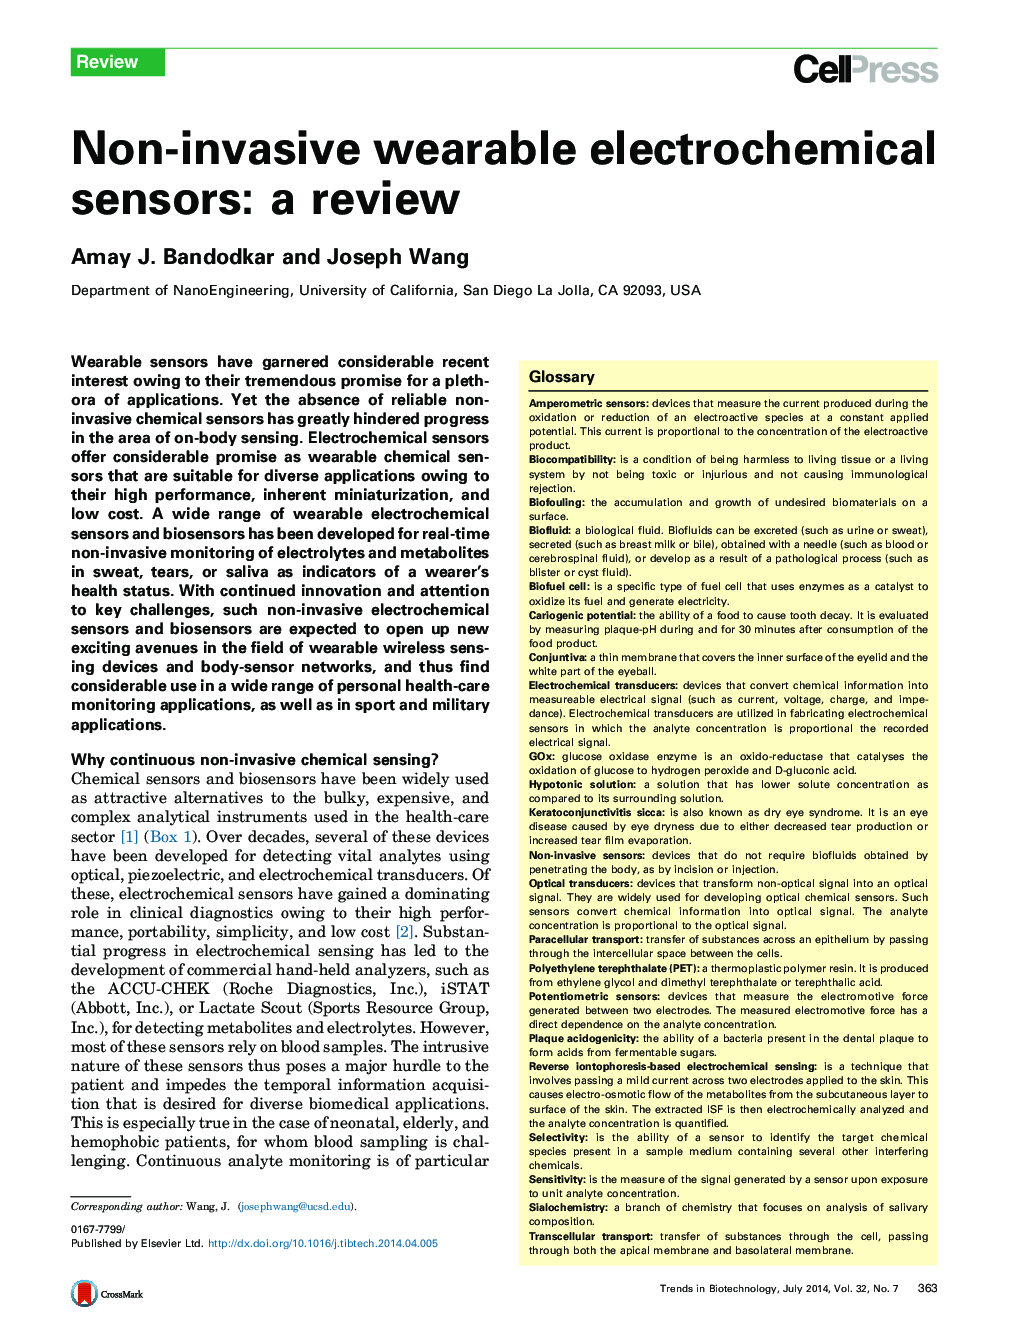 Non-invasive wearable electrochemical sensors: a review